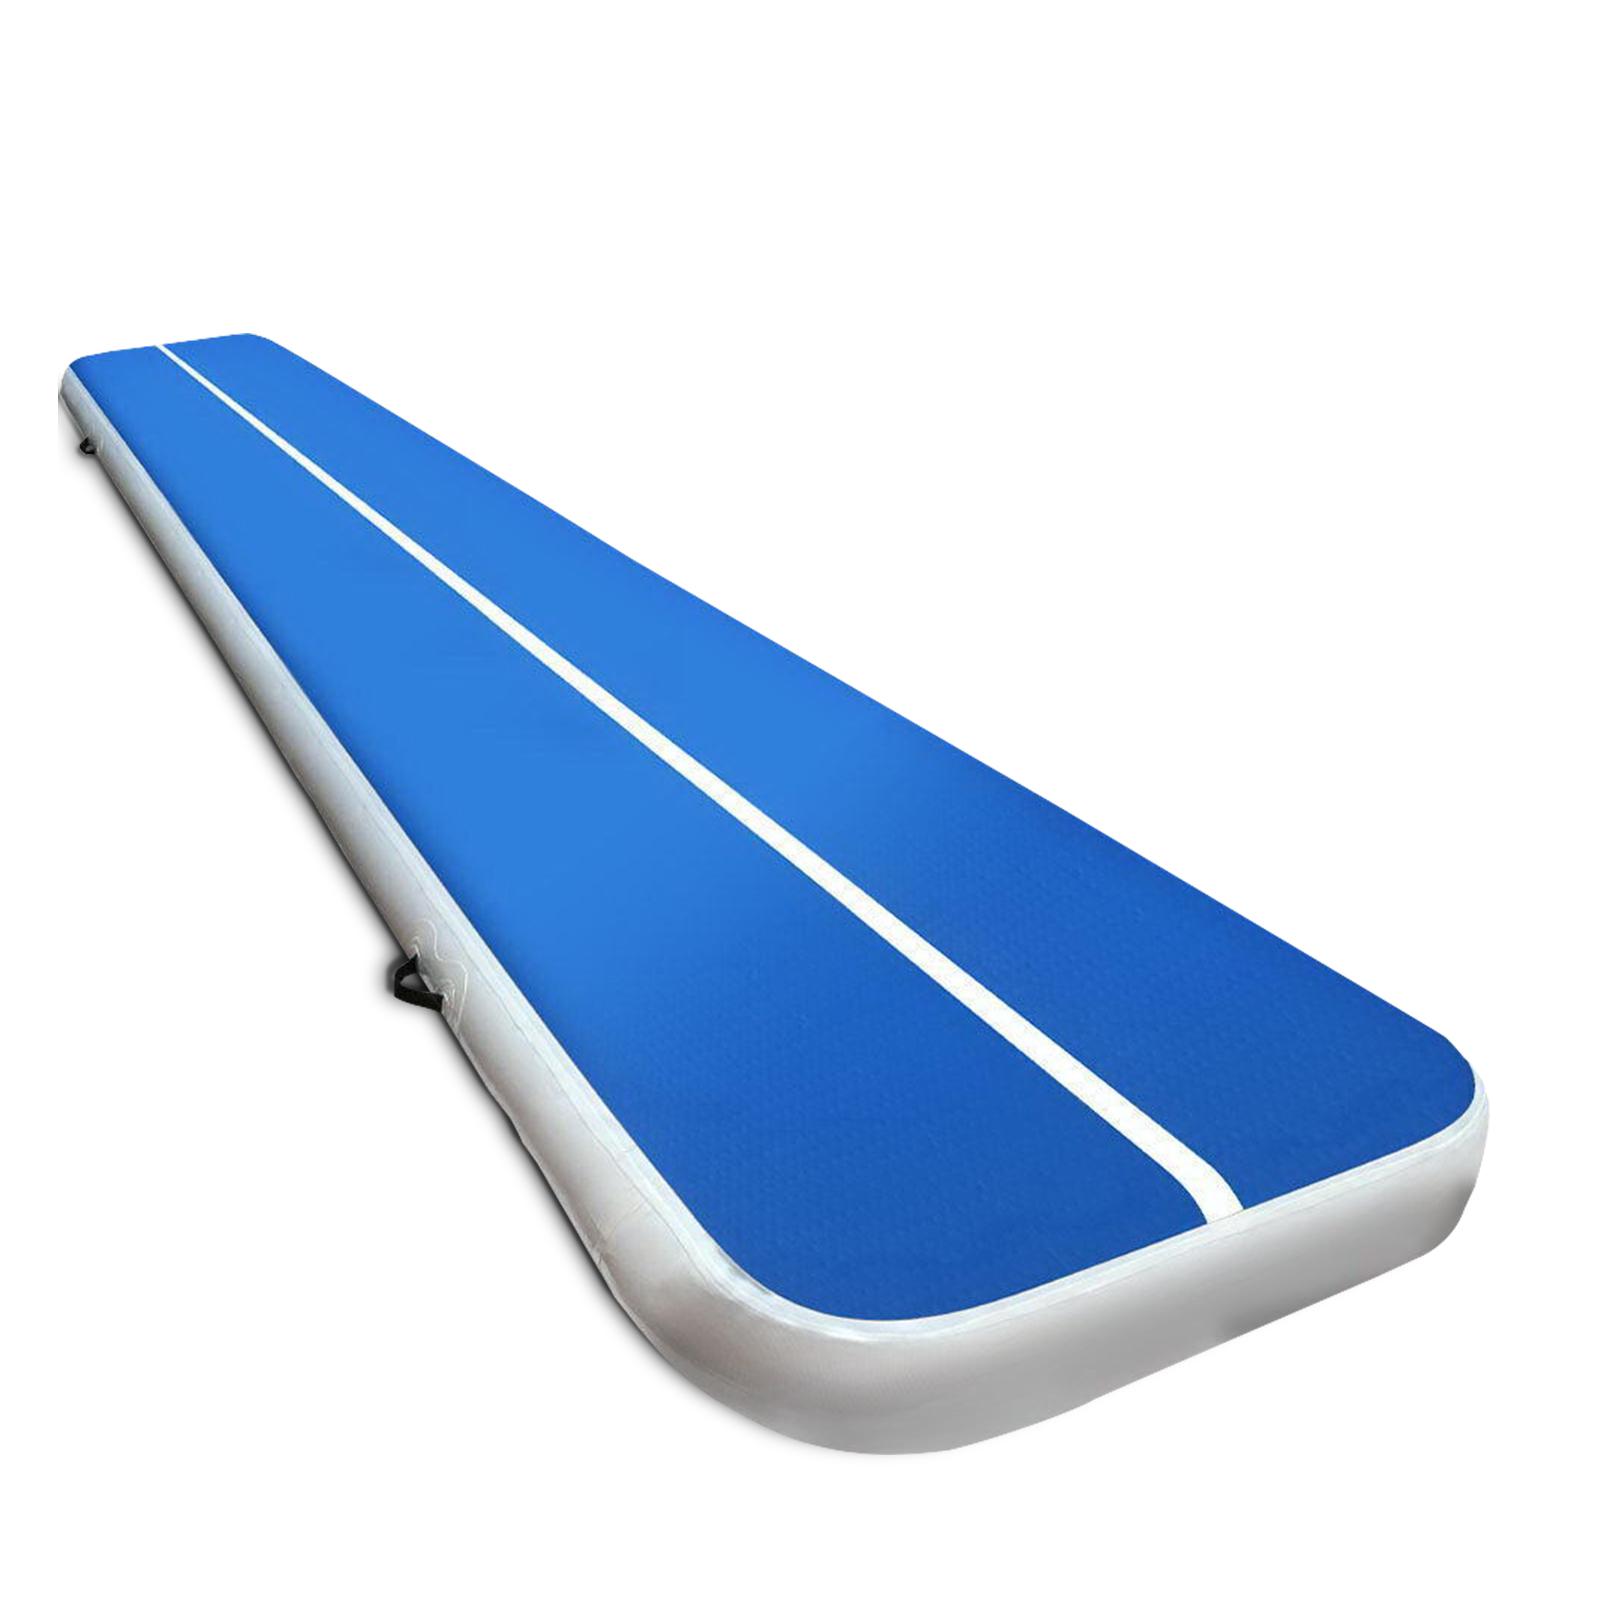 Inflatable Air Track Mat 20cm Thick Gymnastic Tumbling Blue And White 5m x 1m